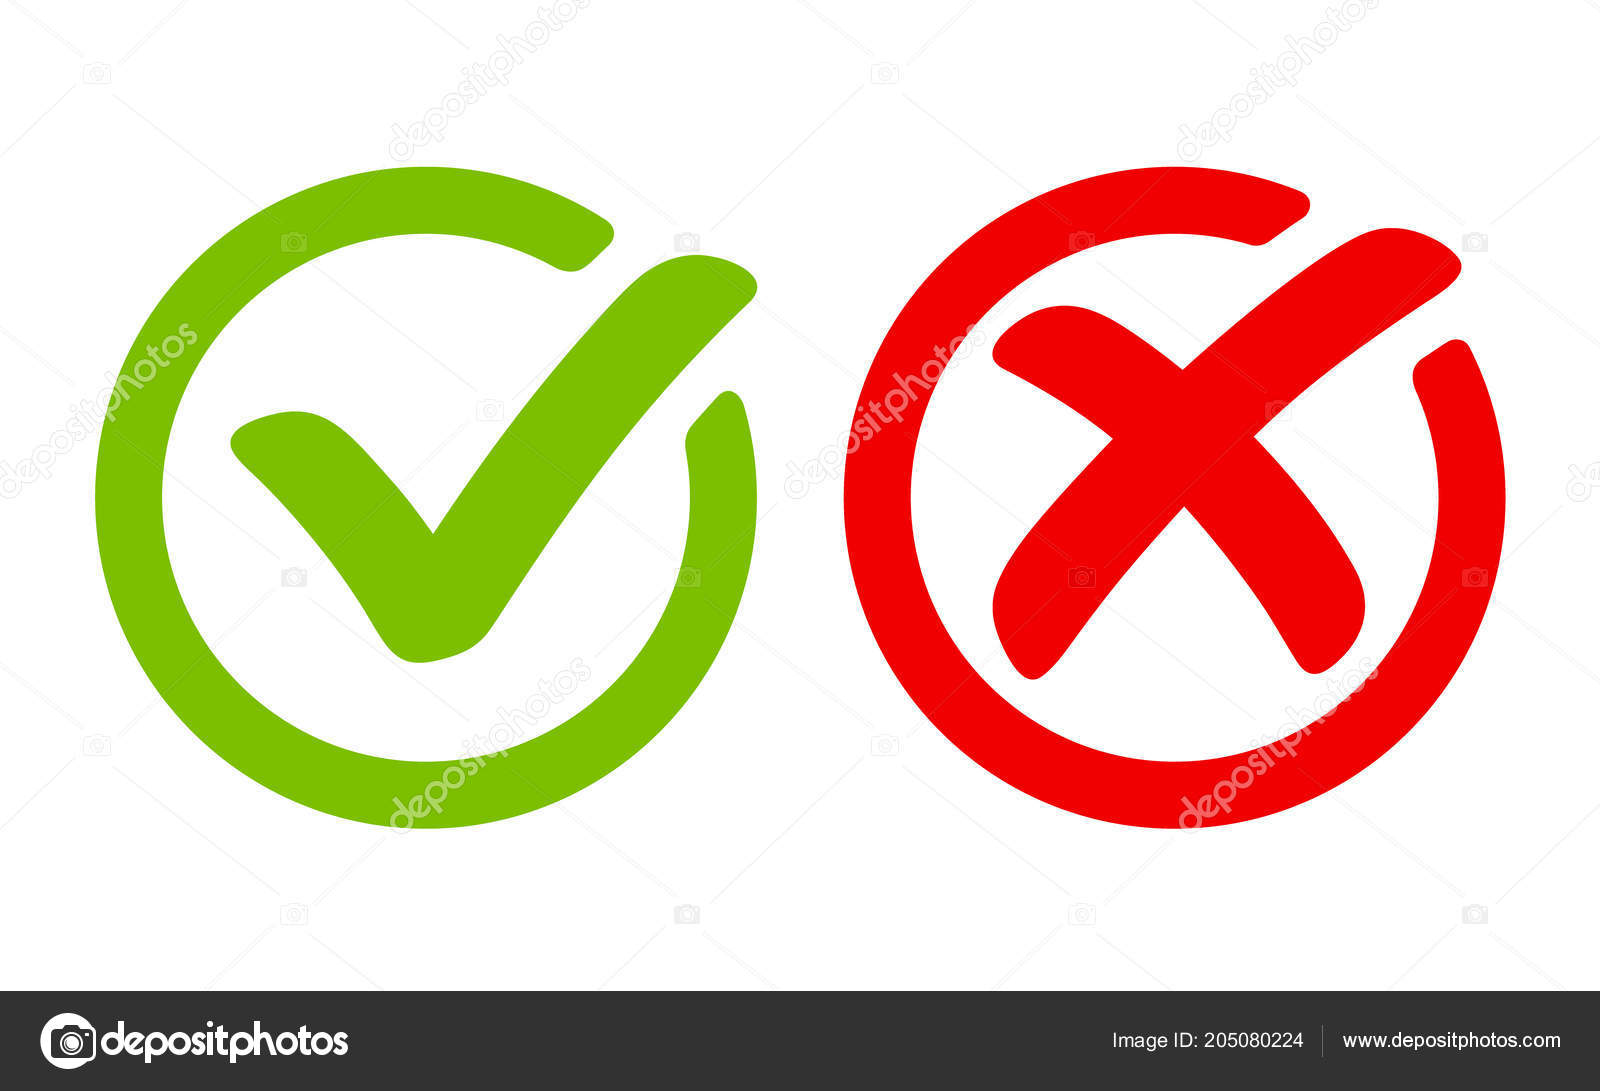 Check mark and cross icons Royalty Free Vector Image